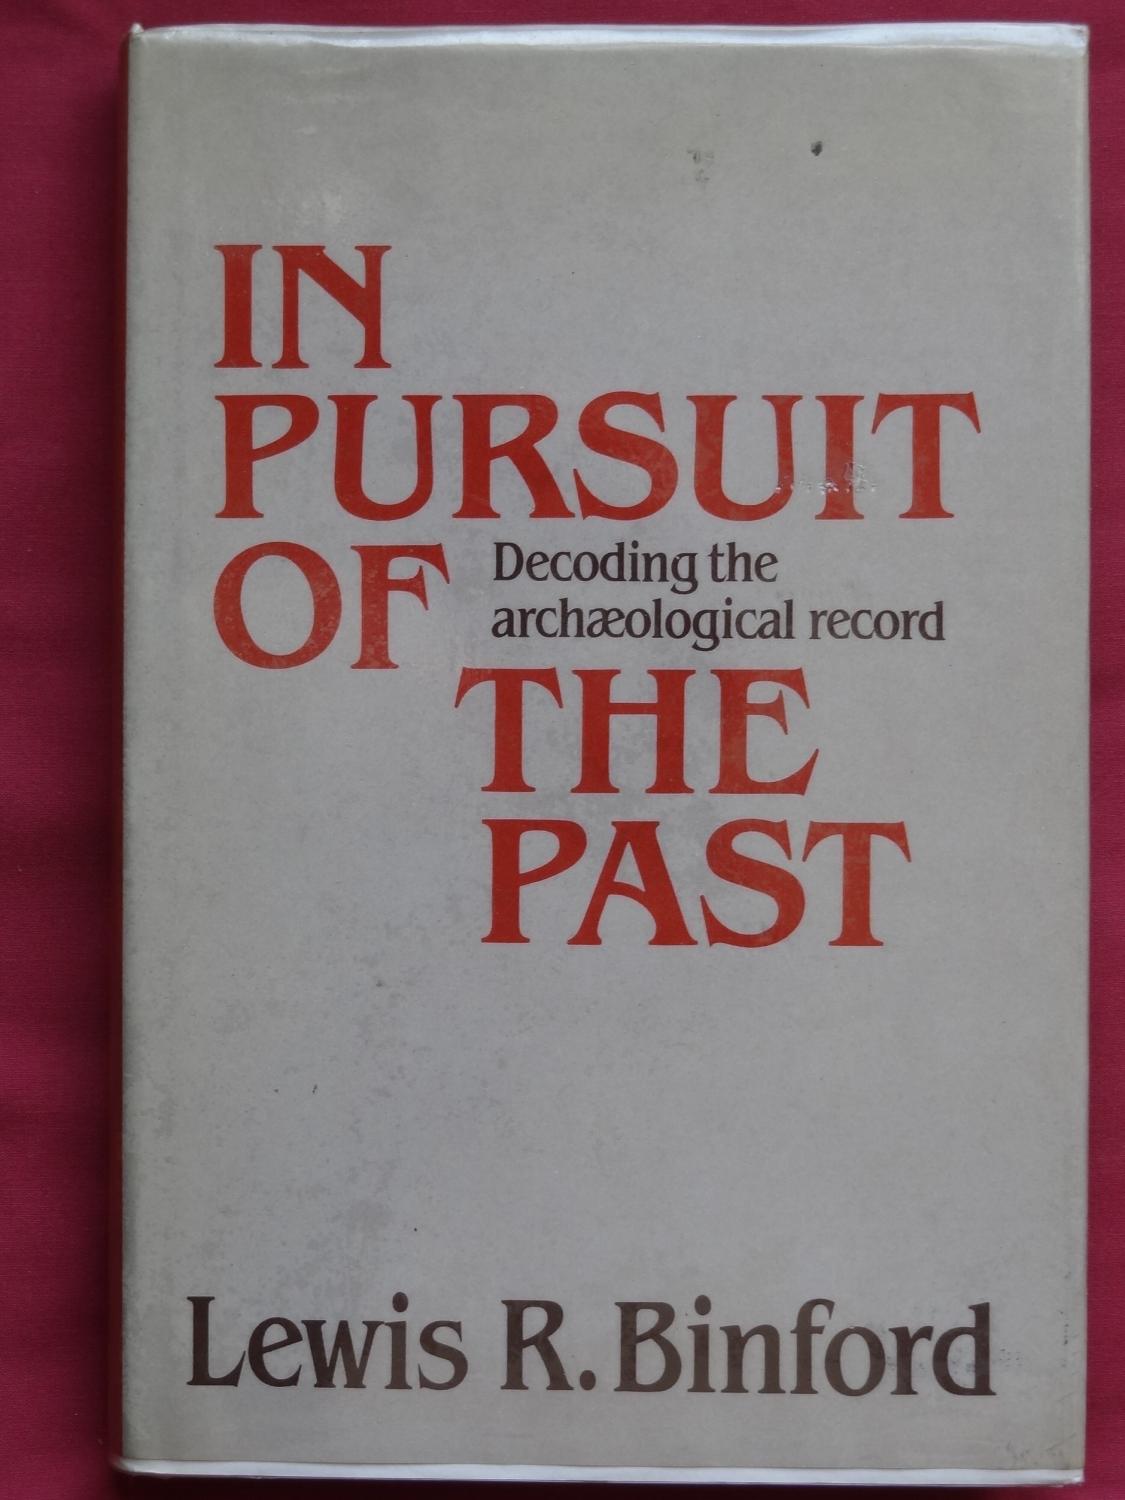 IN PURSUIT OF THE PAST Decoding the Archaeological Record - BINFORD, Lewis R. with collaboration of John J.Cherry and Robin Torrance, Foreword by Colin Renfrew